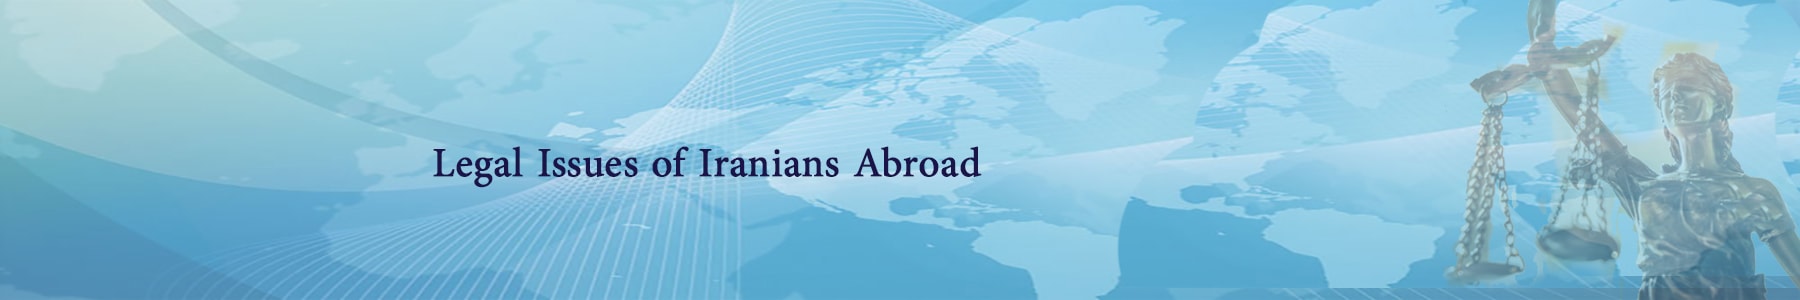 Iranian-abroad-legal-consultation-services